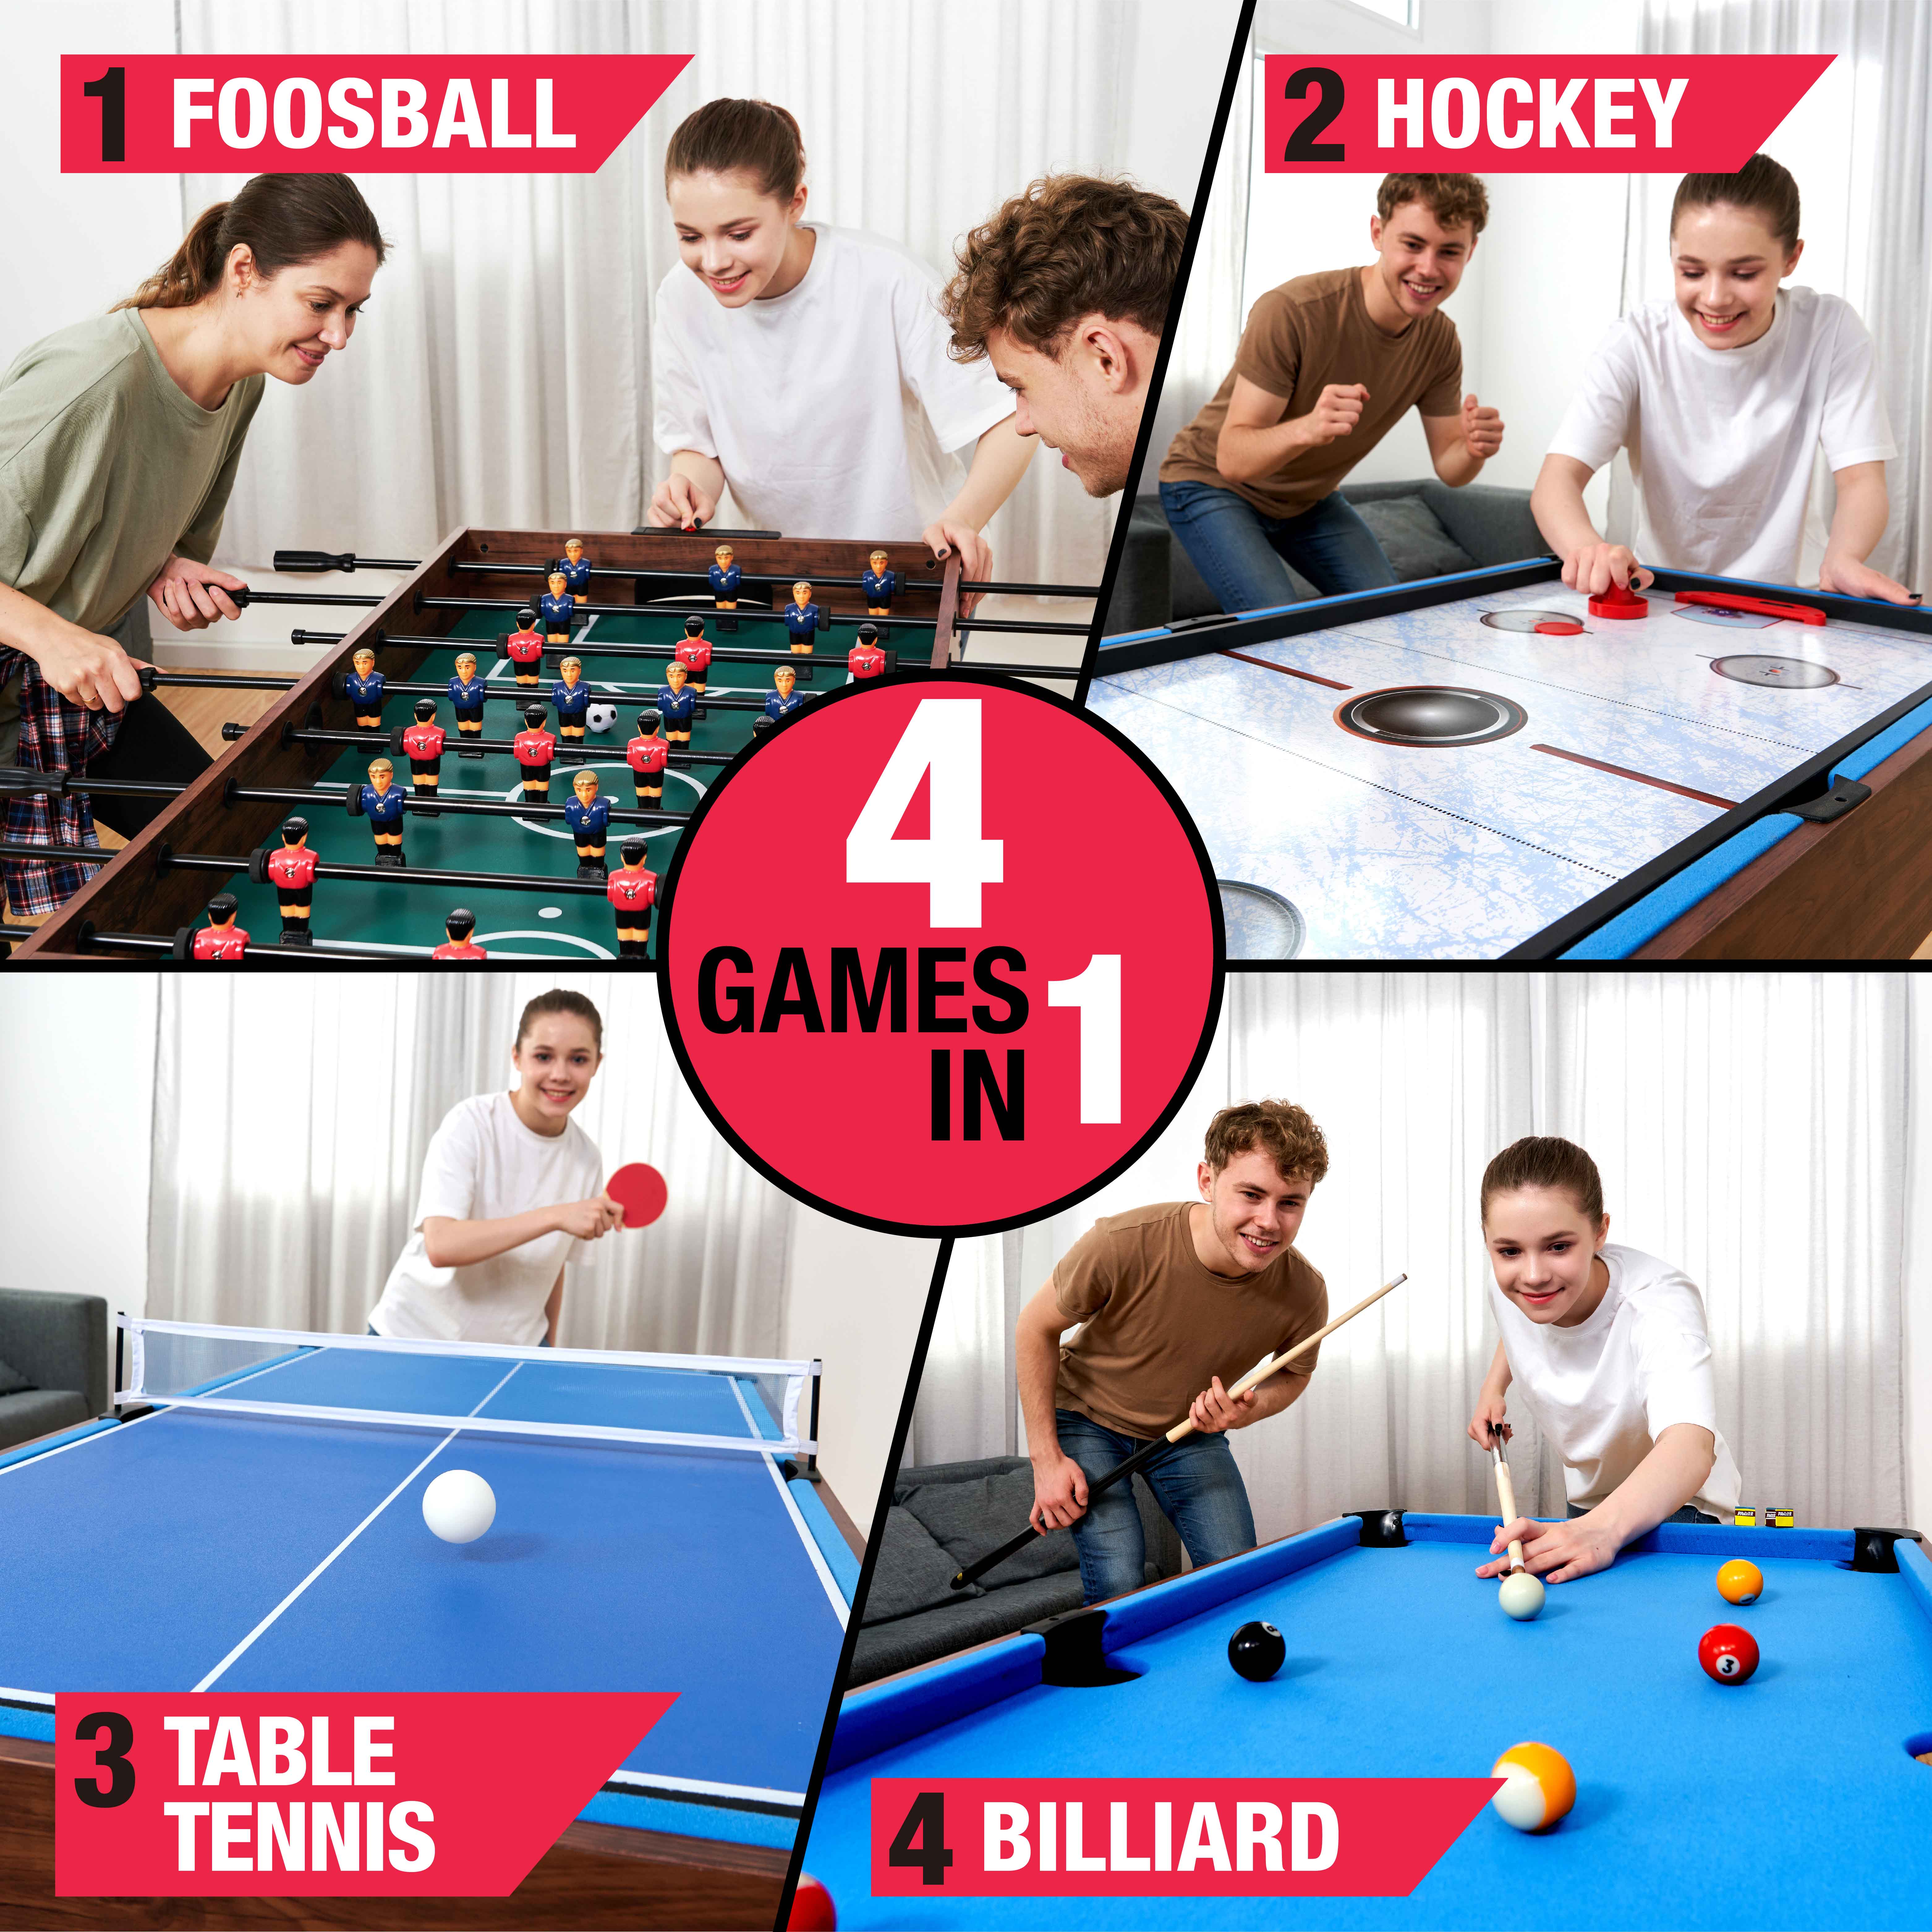 MD Sports 54" 4 in 1 Combo Game Table, Foosball, Hockey, Table Tennis, Billiards - image 5 of 13